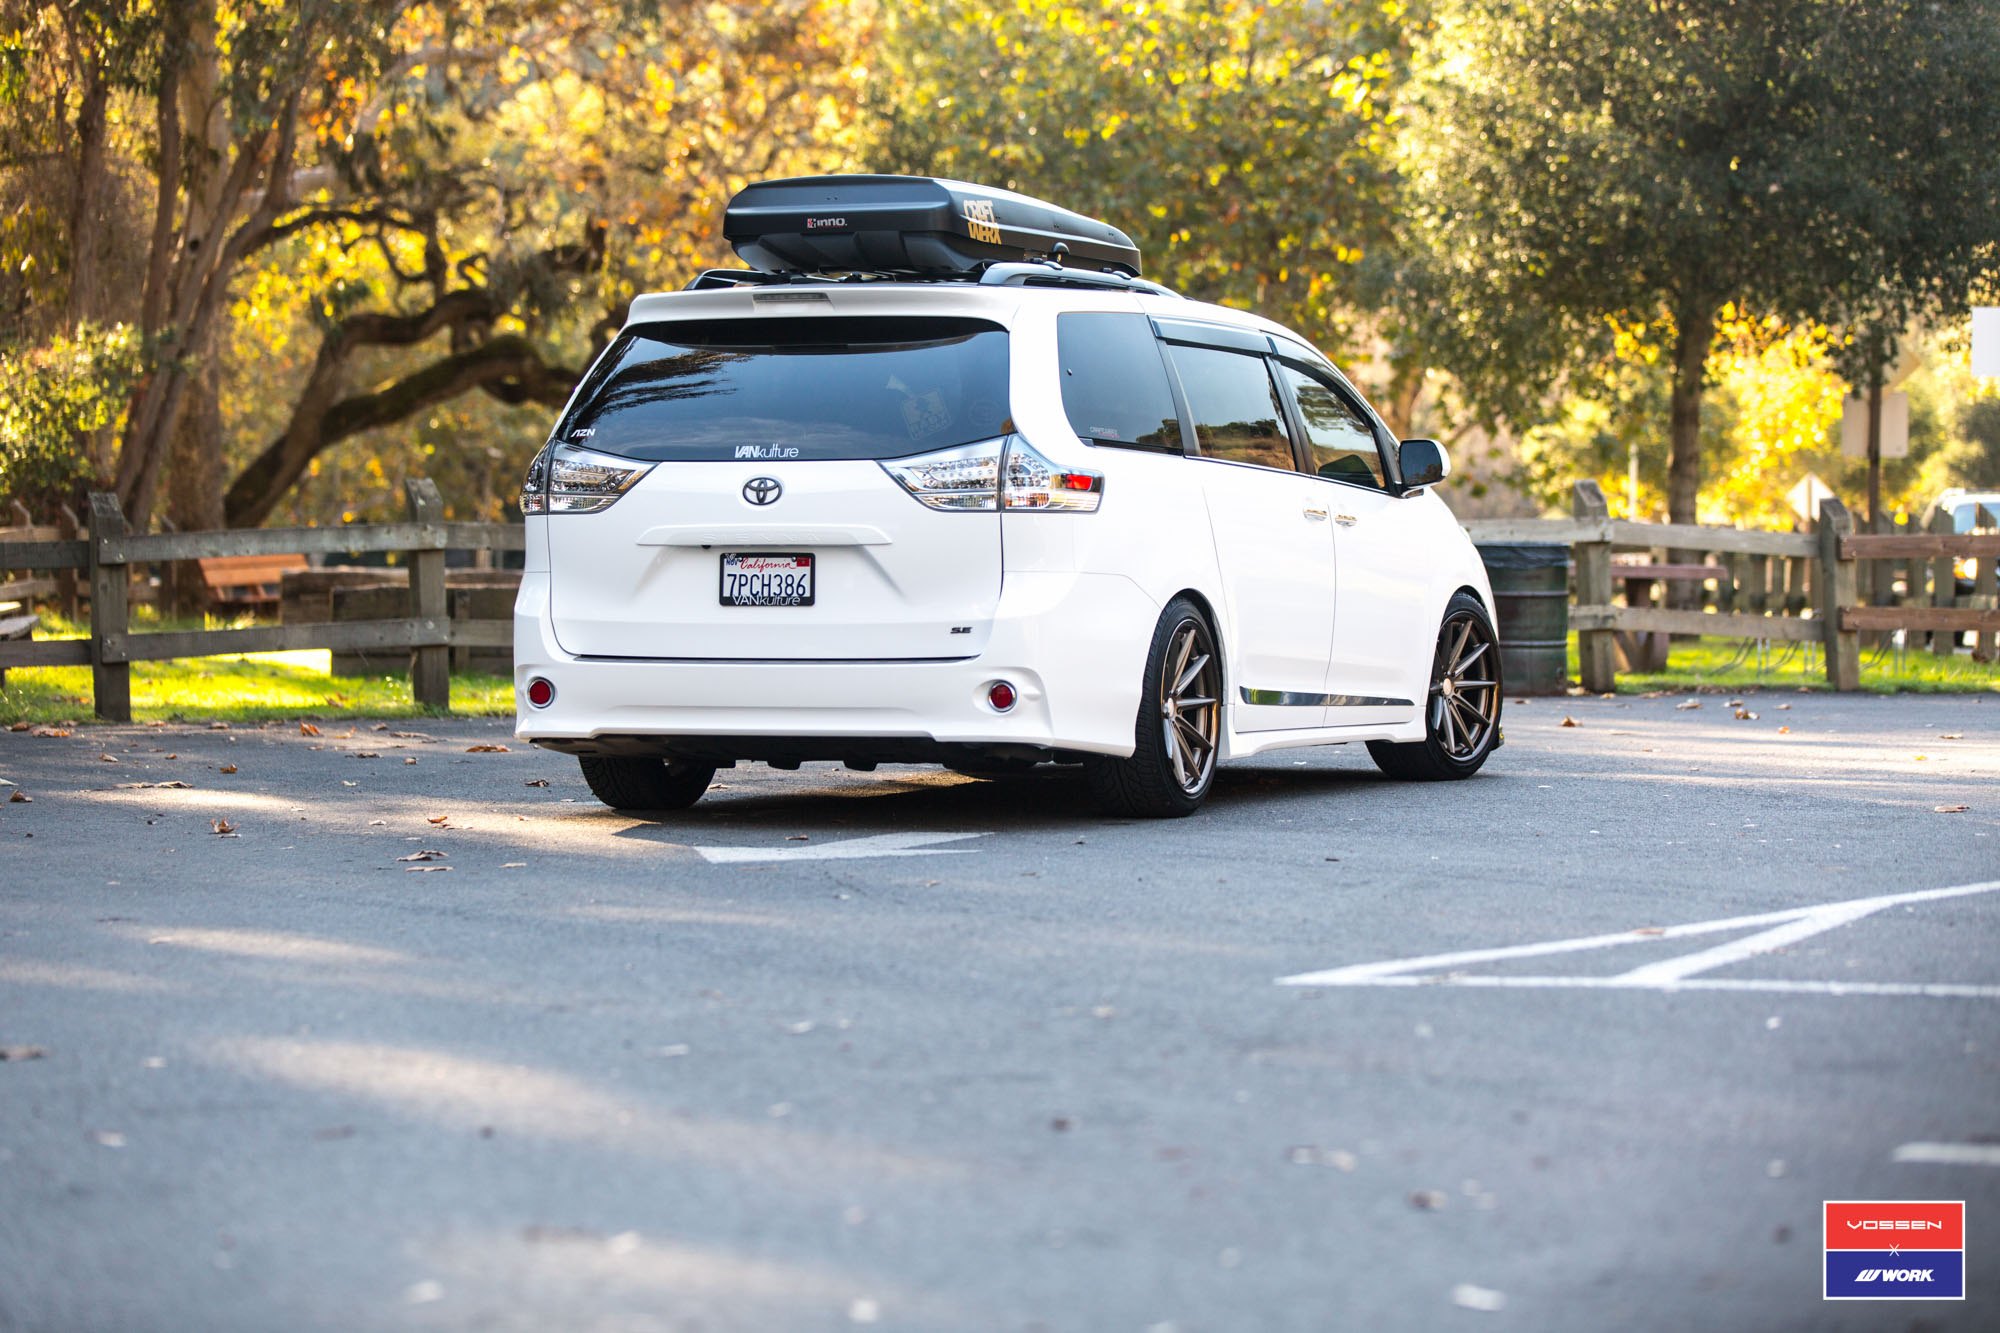 Aftermarket LED Taillights on White Toyota Sienna - Photo by Vossen